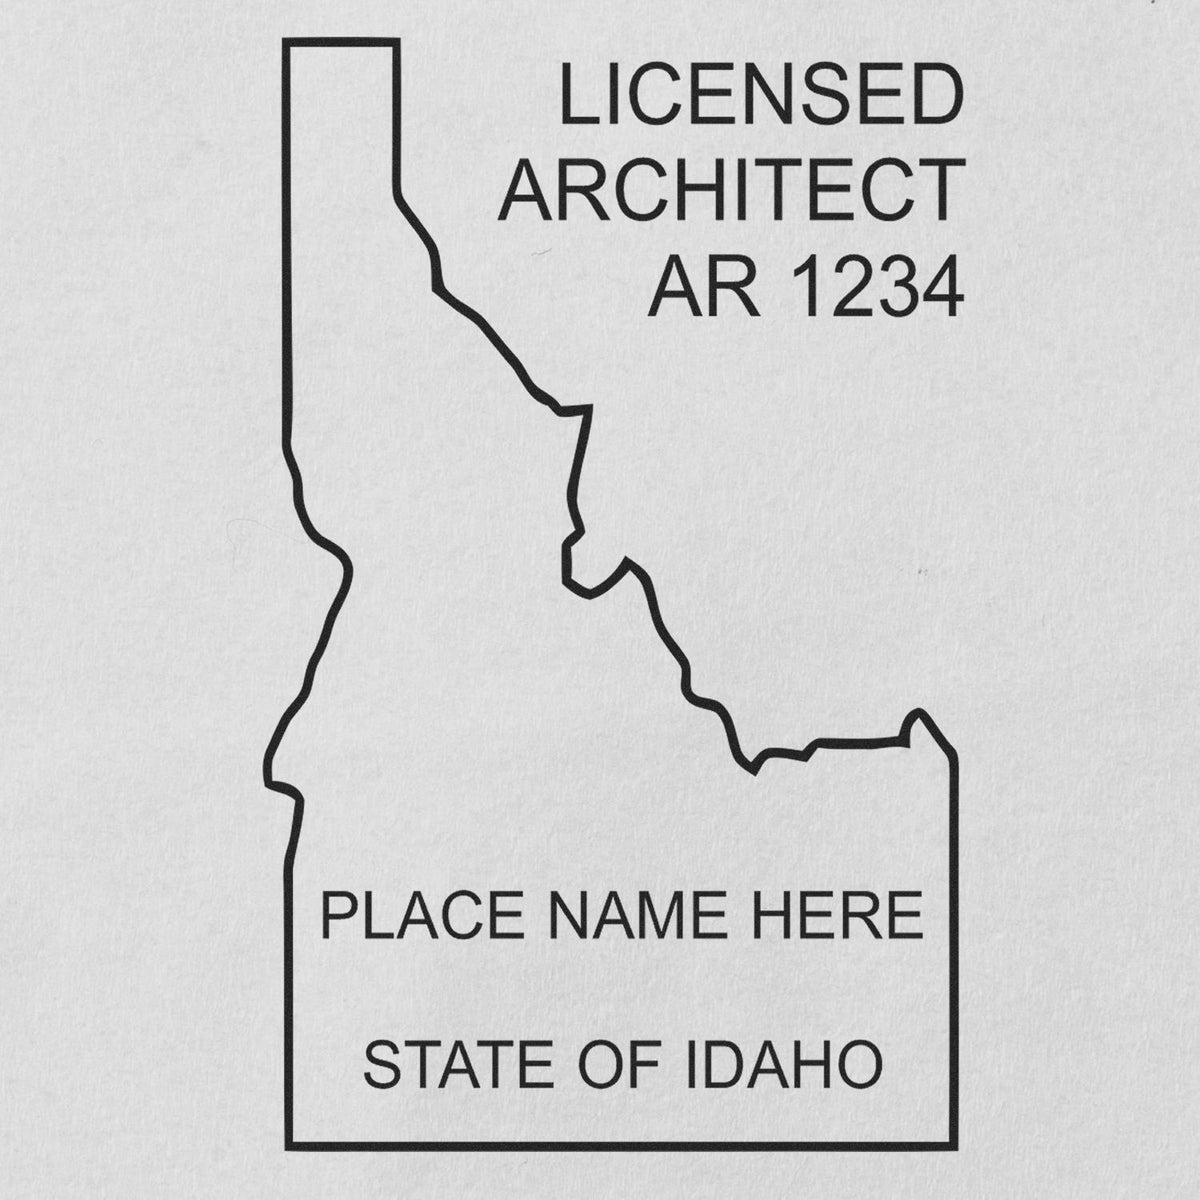 Slim Pre-Inked Idaho Architect Seal Stamp in use photo showing a stamped imprint of the Slim Pre-Inked Idaho Architect Seal Stamp